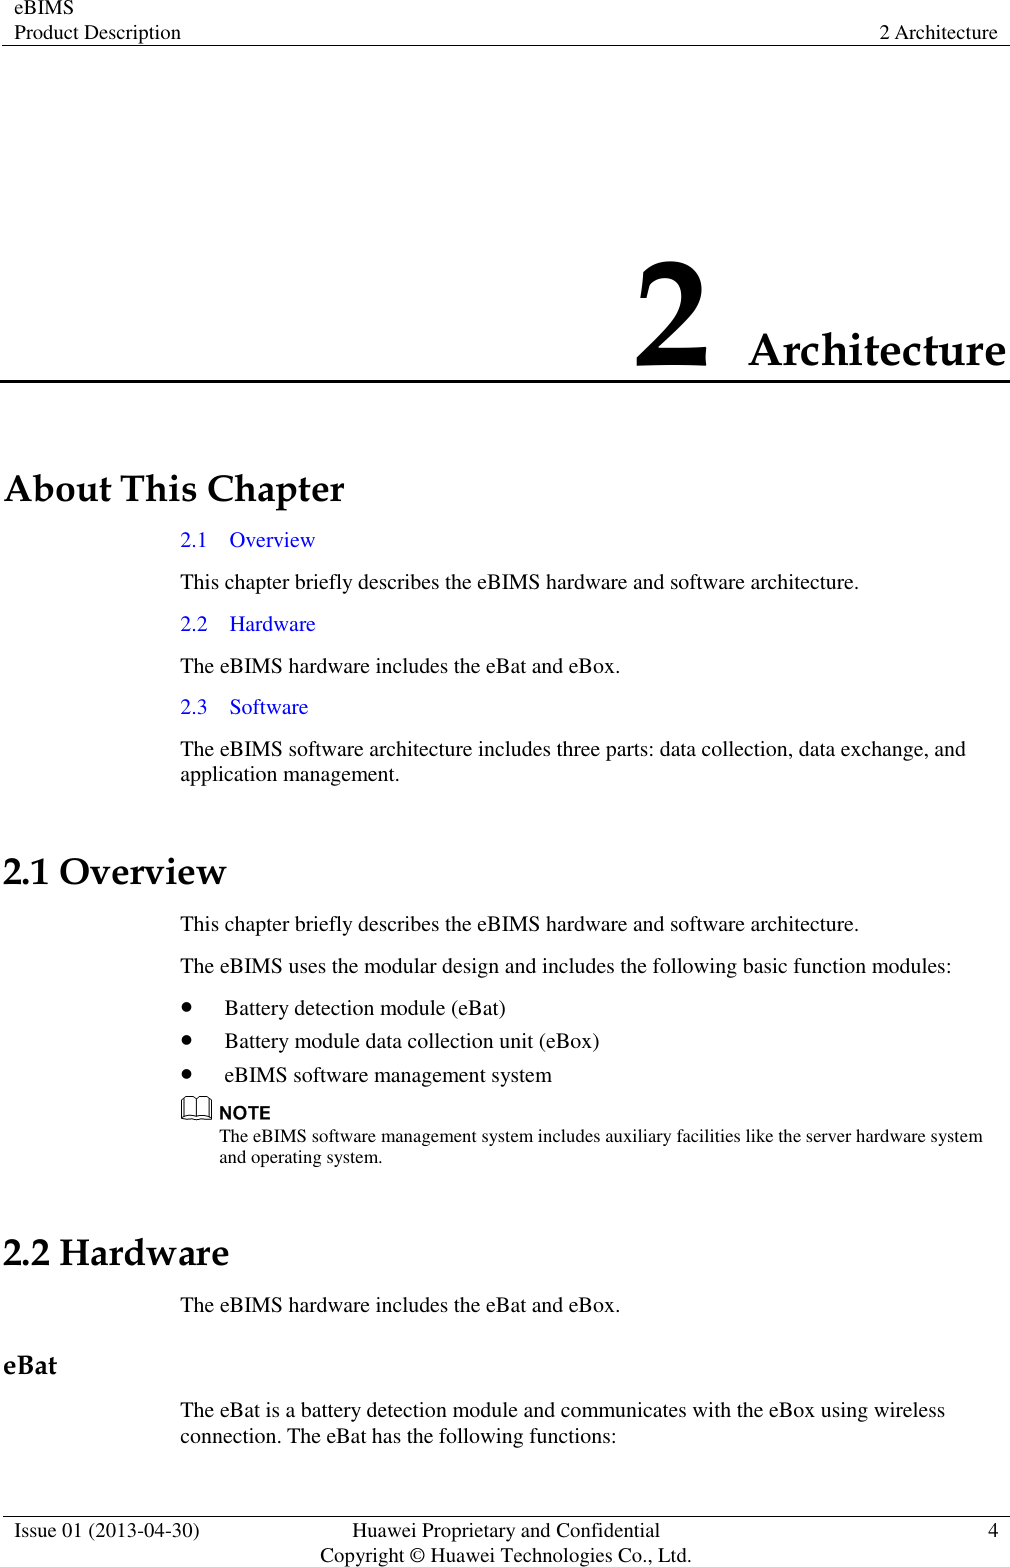 eBIMS Product Description 2 Architecture  Issue 01 (2013-04-30) Huawei Proprietary and Confidential                                     Copyright © Huawei Technologies Co., Ltd. 4  2 Architecture About This Chapter 2.1    Overview This chapter briefly describes the eBIMS hardware and software architecture. 2.2    Hardware The eBIMS hardware includes the eBat and eBox. 2.3    Software The eBIMS software architecture includes three parts: data collection, data exchange, and application management. 2.1 Overview This chapter briefly describes the eBIMS hardware and software architecture. The eBIMS uses the modular design and includes the following basic function modules:  Battery detection module (eBat)  Battery module data collection unit (eBox)  eBIMS software management system  The eBIMS software management system includes auxiliary facilities like the server hardware system and operating system. 2.2 Hardware The eBIMS hardware includes the eBat and eBox. eBat The eBat is a battery detection module and communicates with the eBox using wireless connection. The eBat has the following functions: 